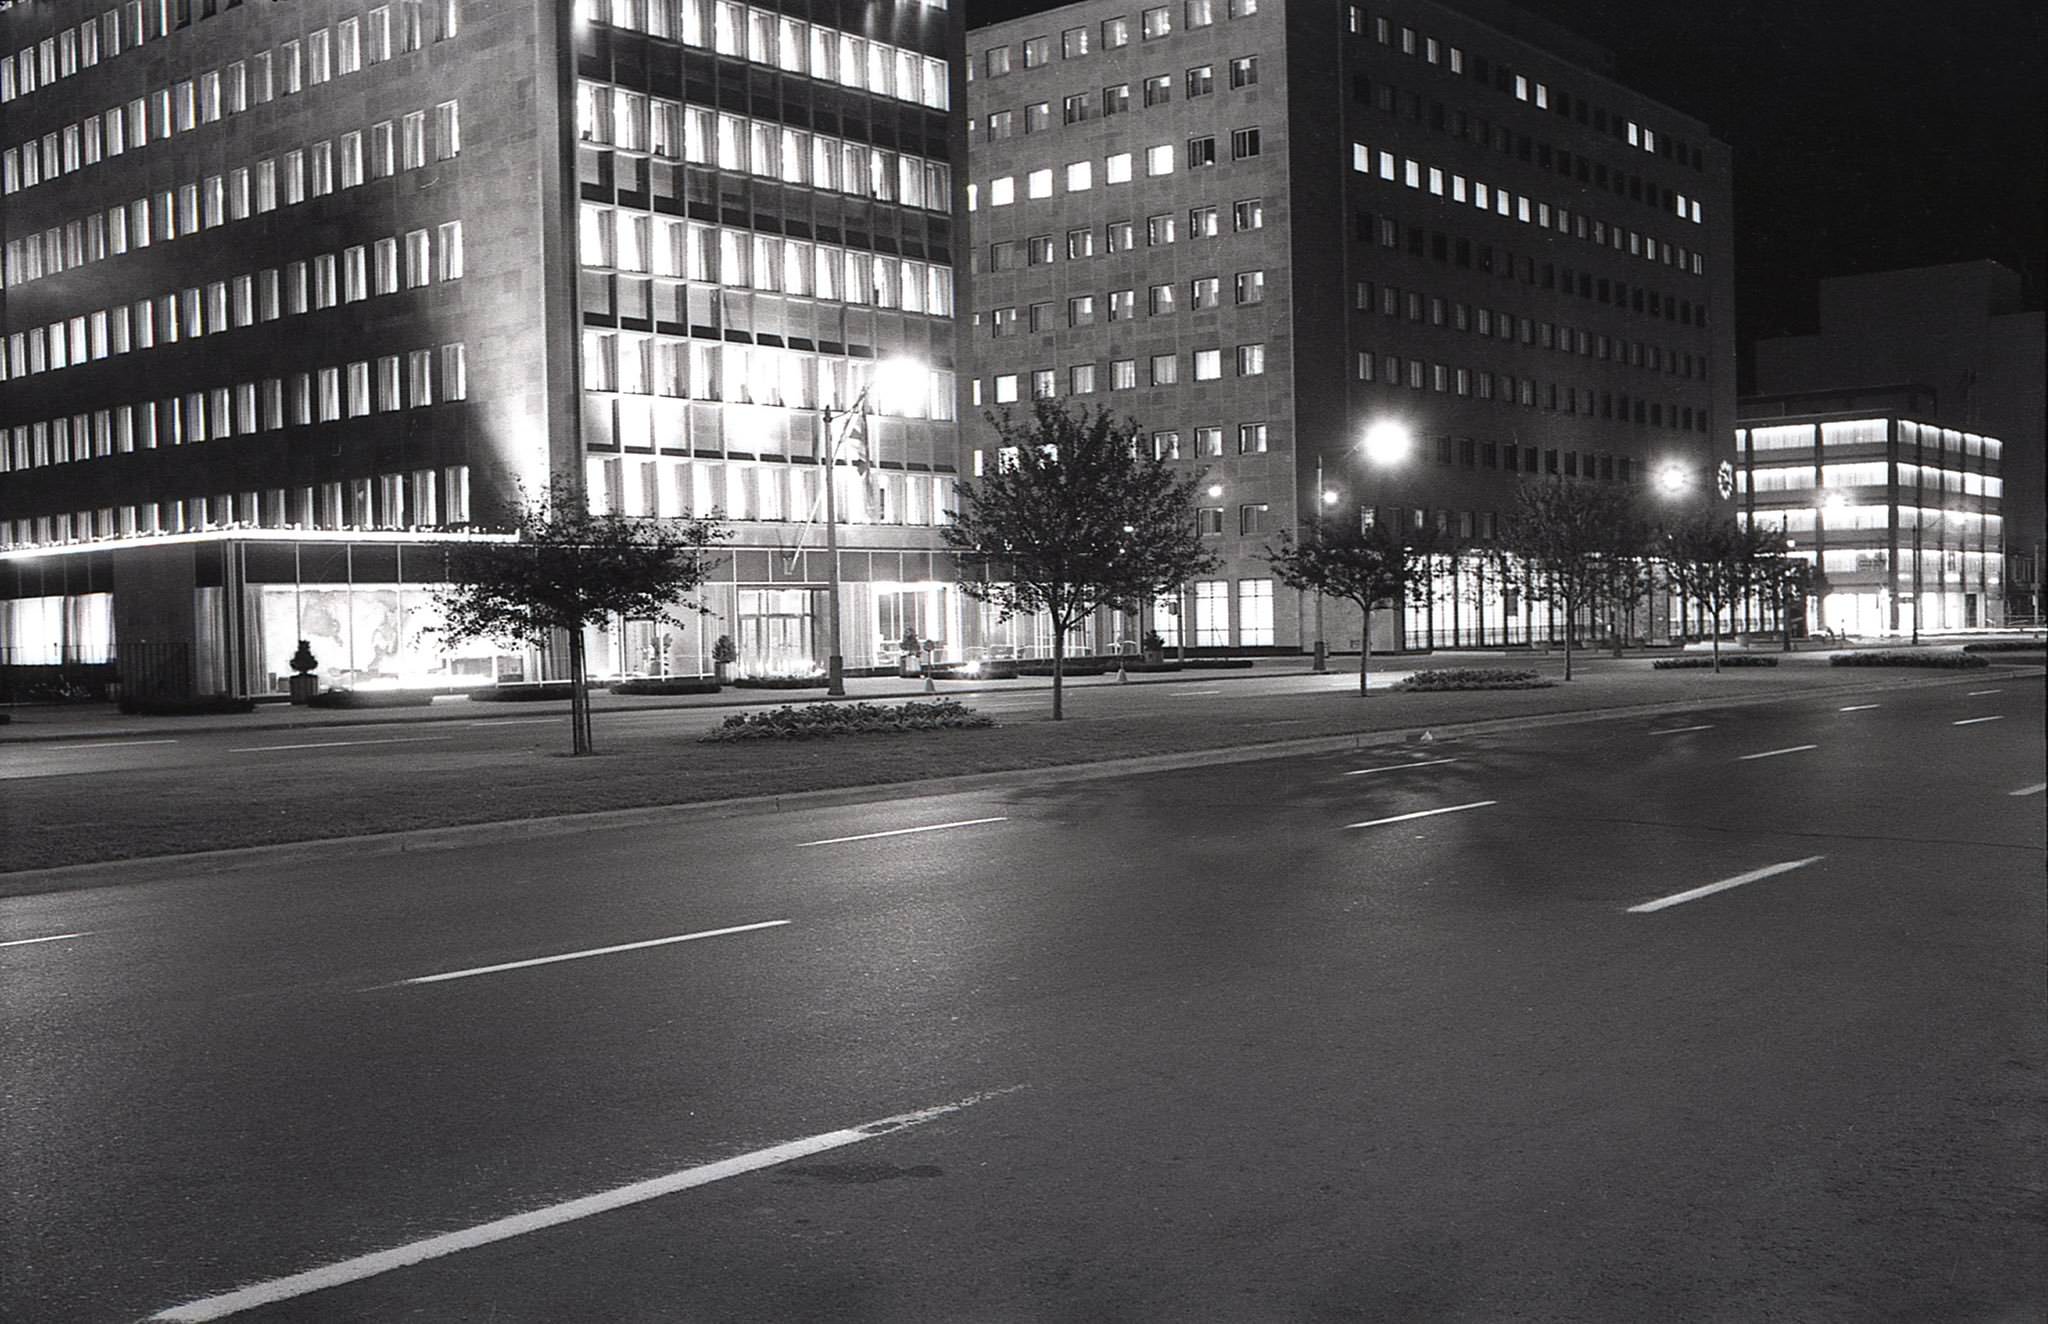 A Marani and Morris set piece, looking southeast across University Avenue at 505 University (Shell Oil Building) and 481 University (Maclean Hunter Building), 1959